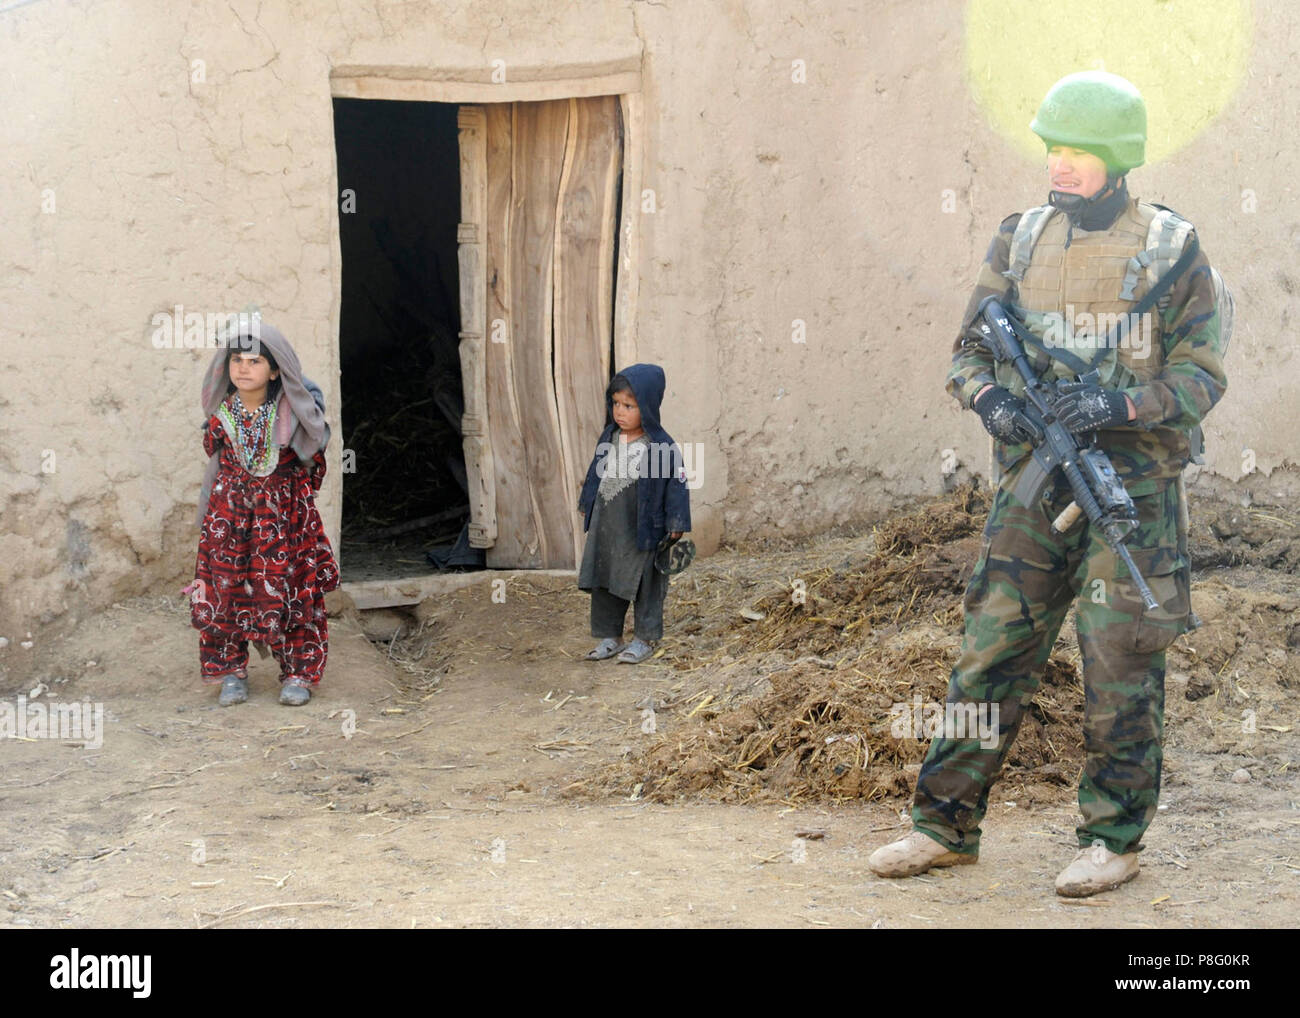 8th Commando Kandak operation . Village children emerge from their home to observe the activity of a soldier from the 8th Commando Kandak in Doan-e Ulya Village, Shahid-e Hasas district, Uruzgan province, Afghanistan, Feb. 6. The 8th Commando Kandak partners with coalition special operations forces to conduct operations throughout Uruzgan and Zabul provinces. Stock Photo